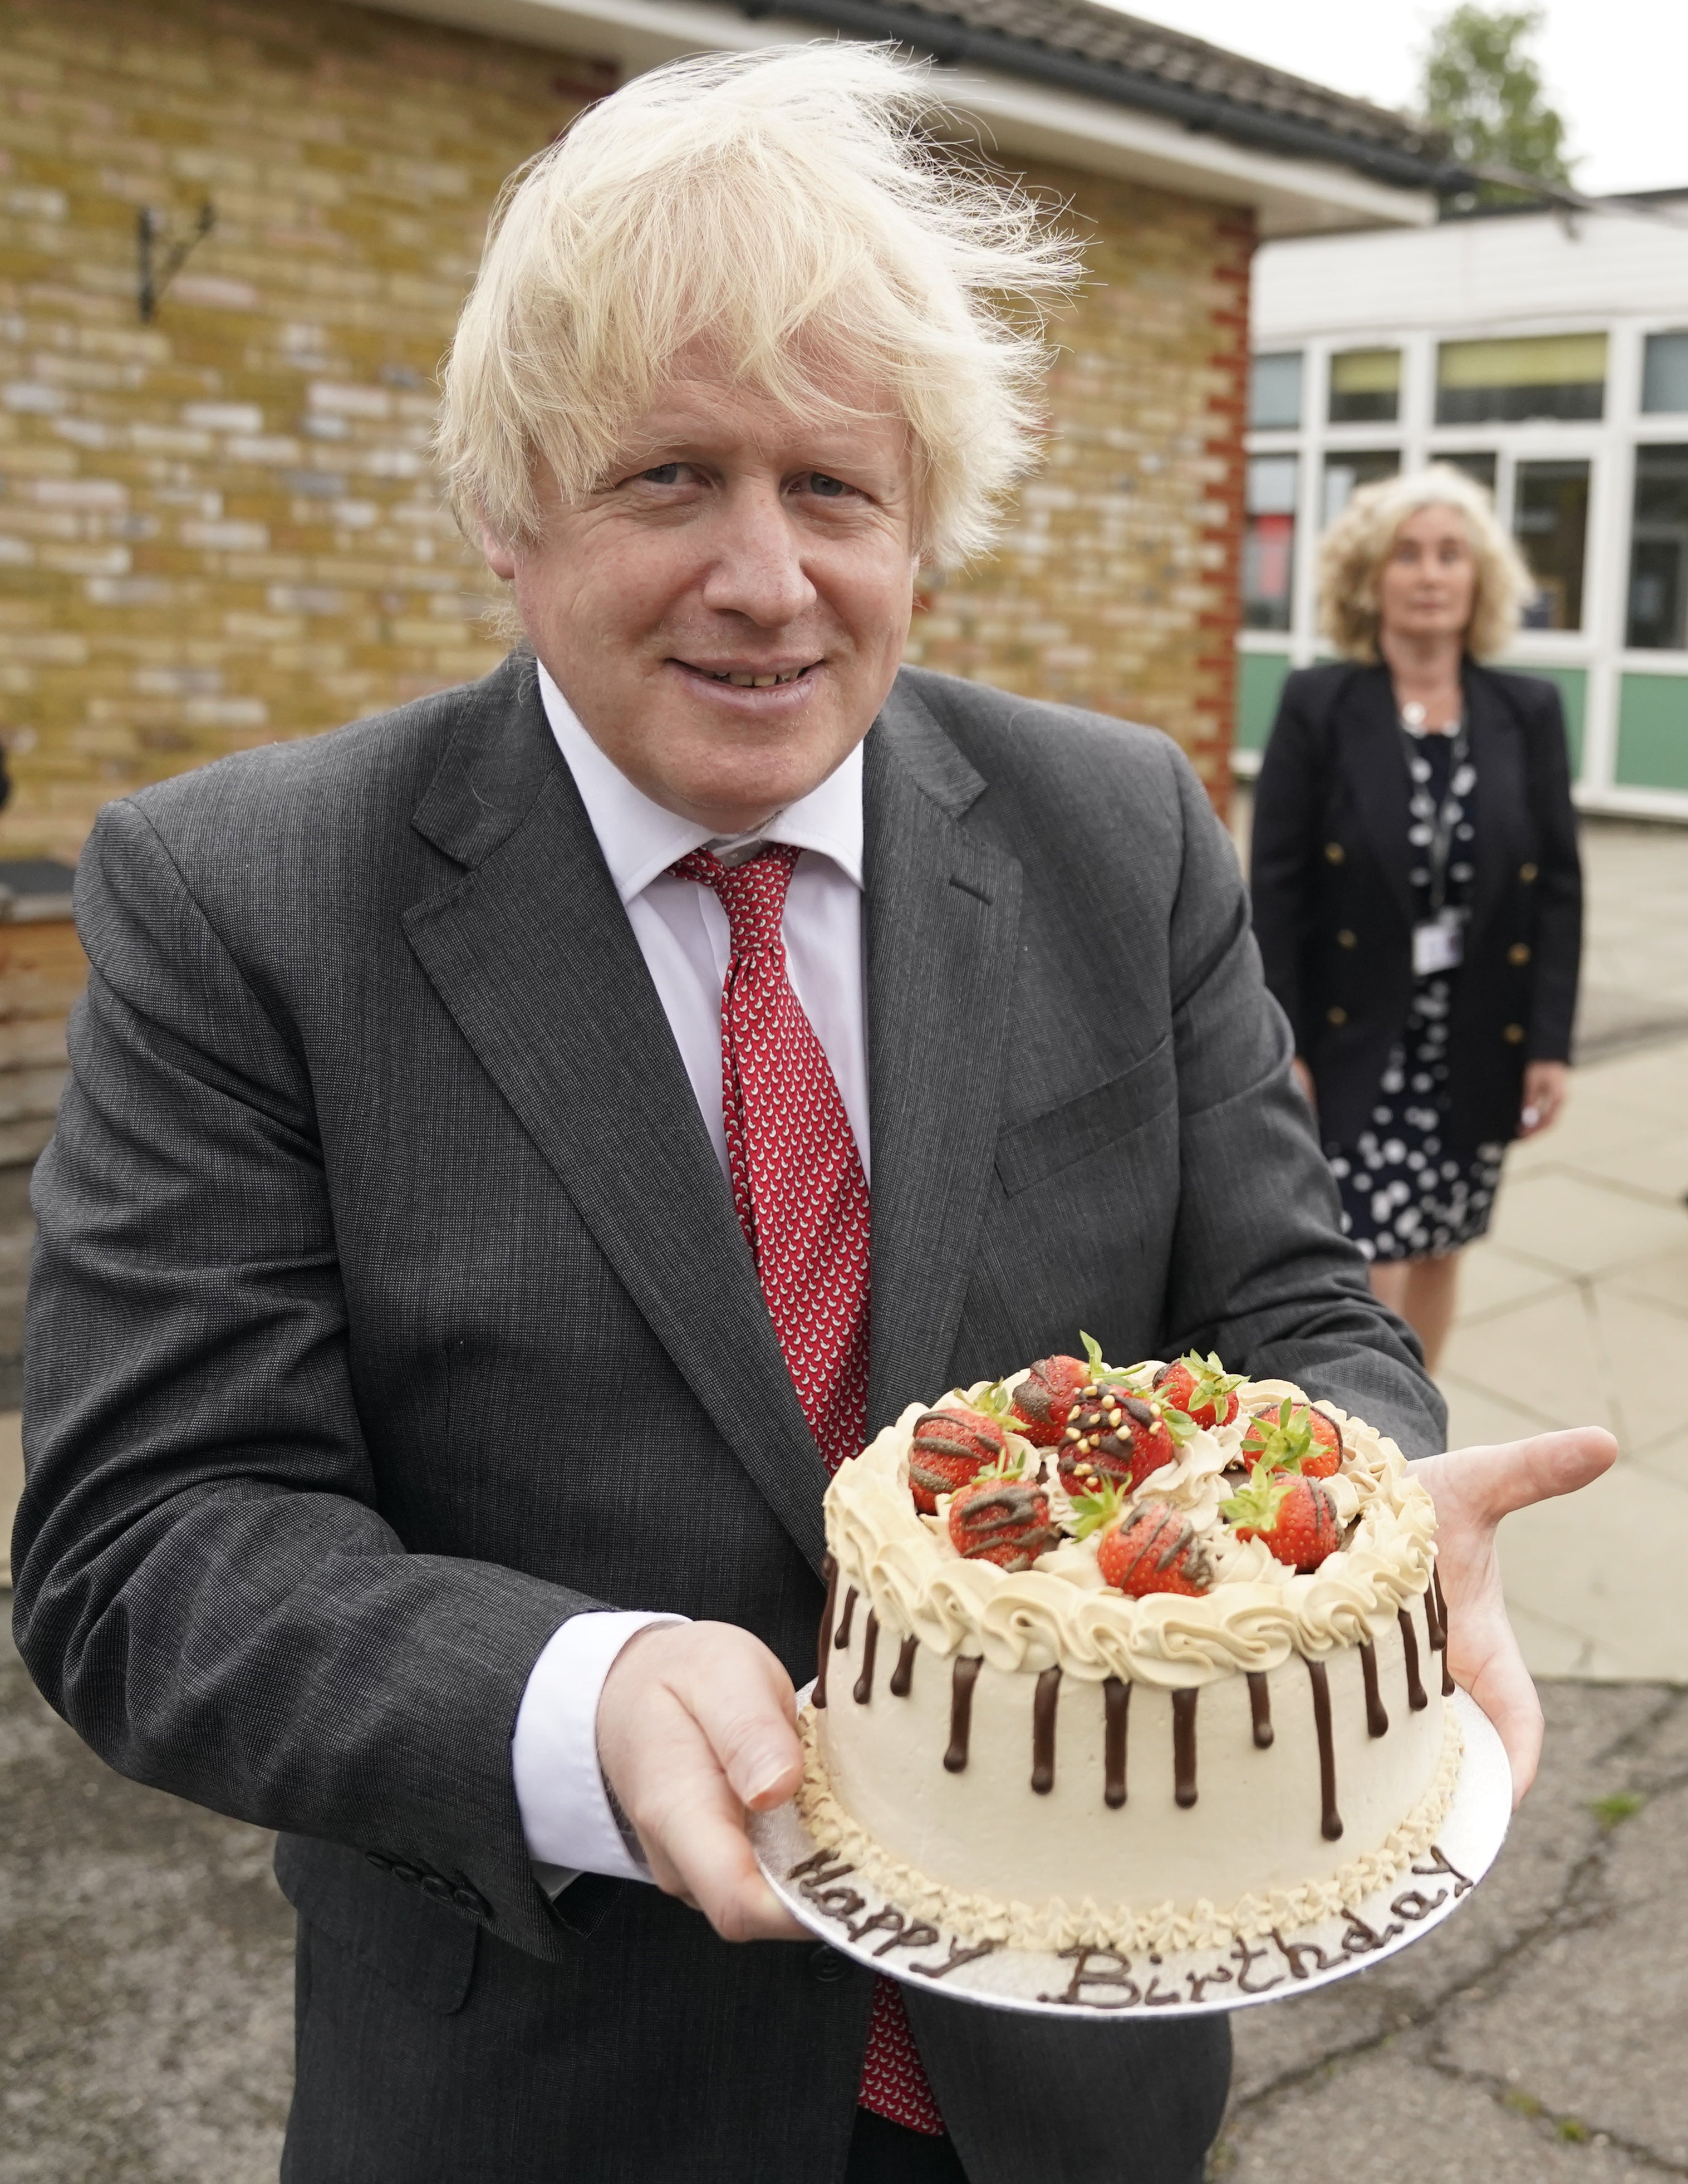 Boris Johnson holds up a birthday cake – baked for him by school staff – during a visit to Bovingdon Primary Academy (Andrew Parsons/Downing Street)